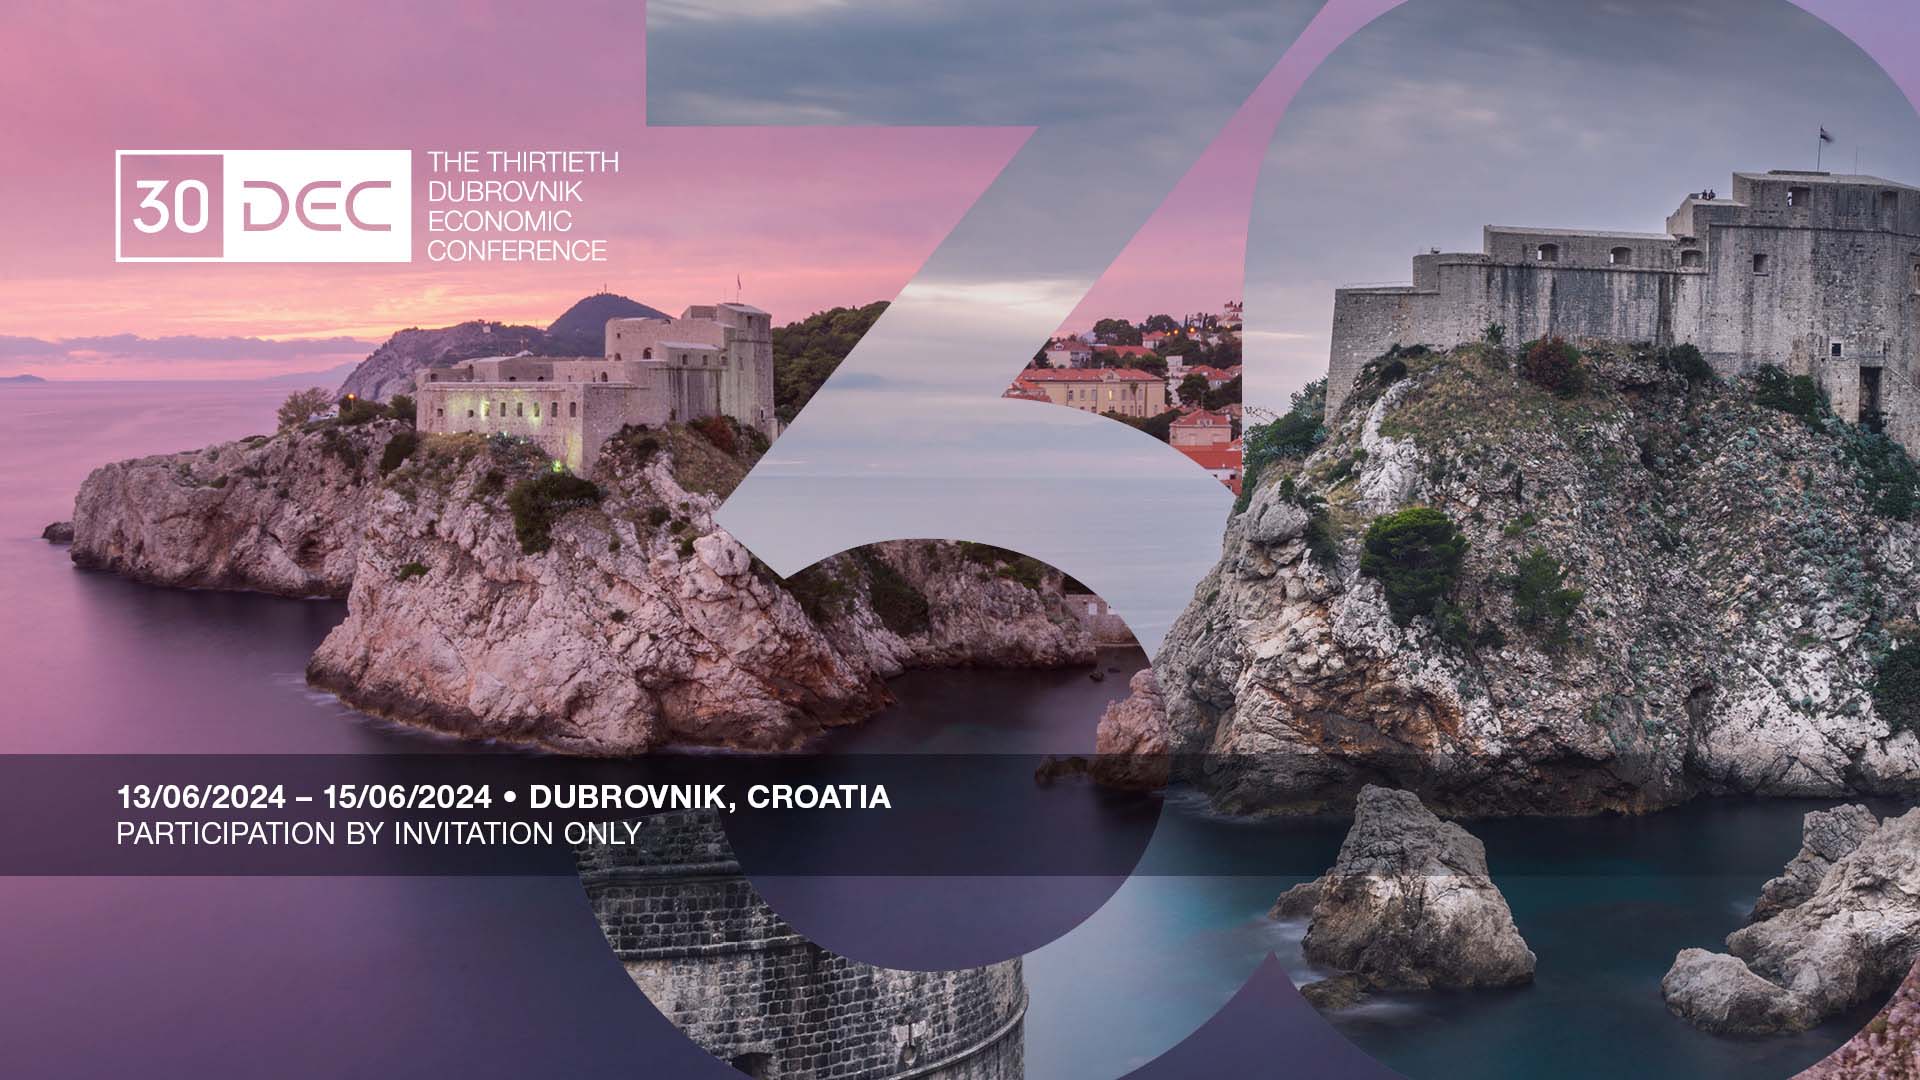 The 30th Dubrovnik Economic Conference